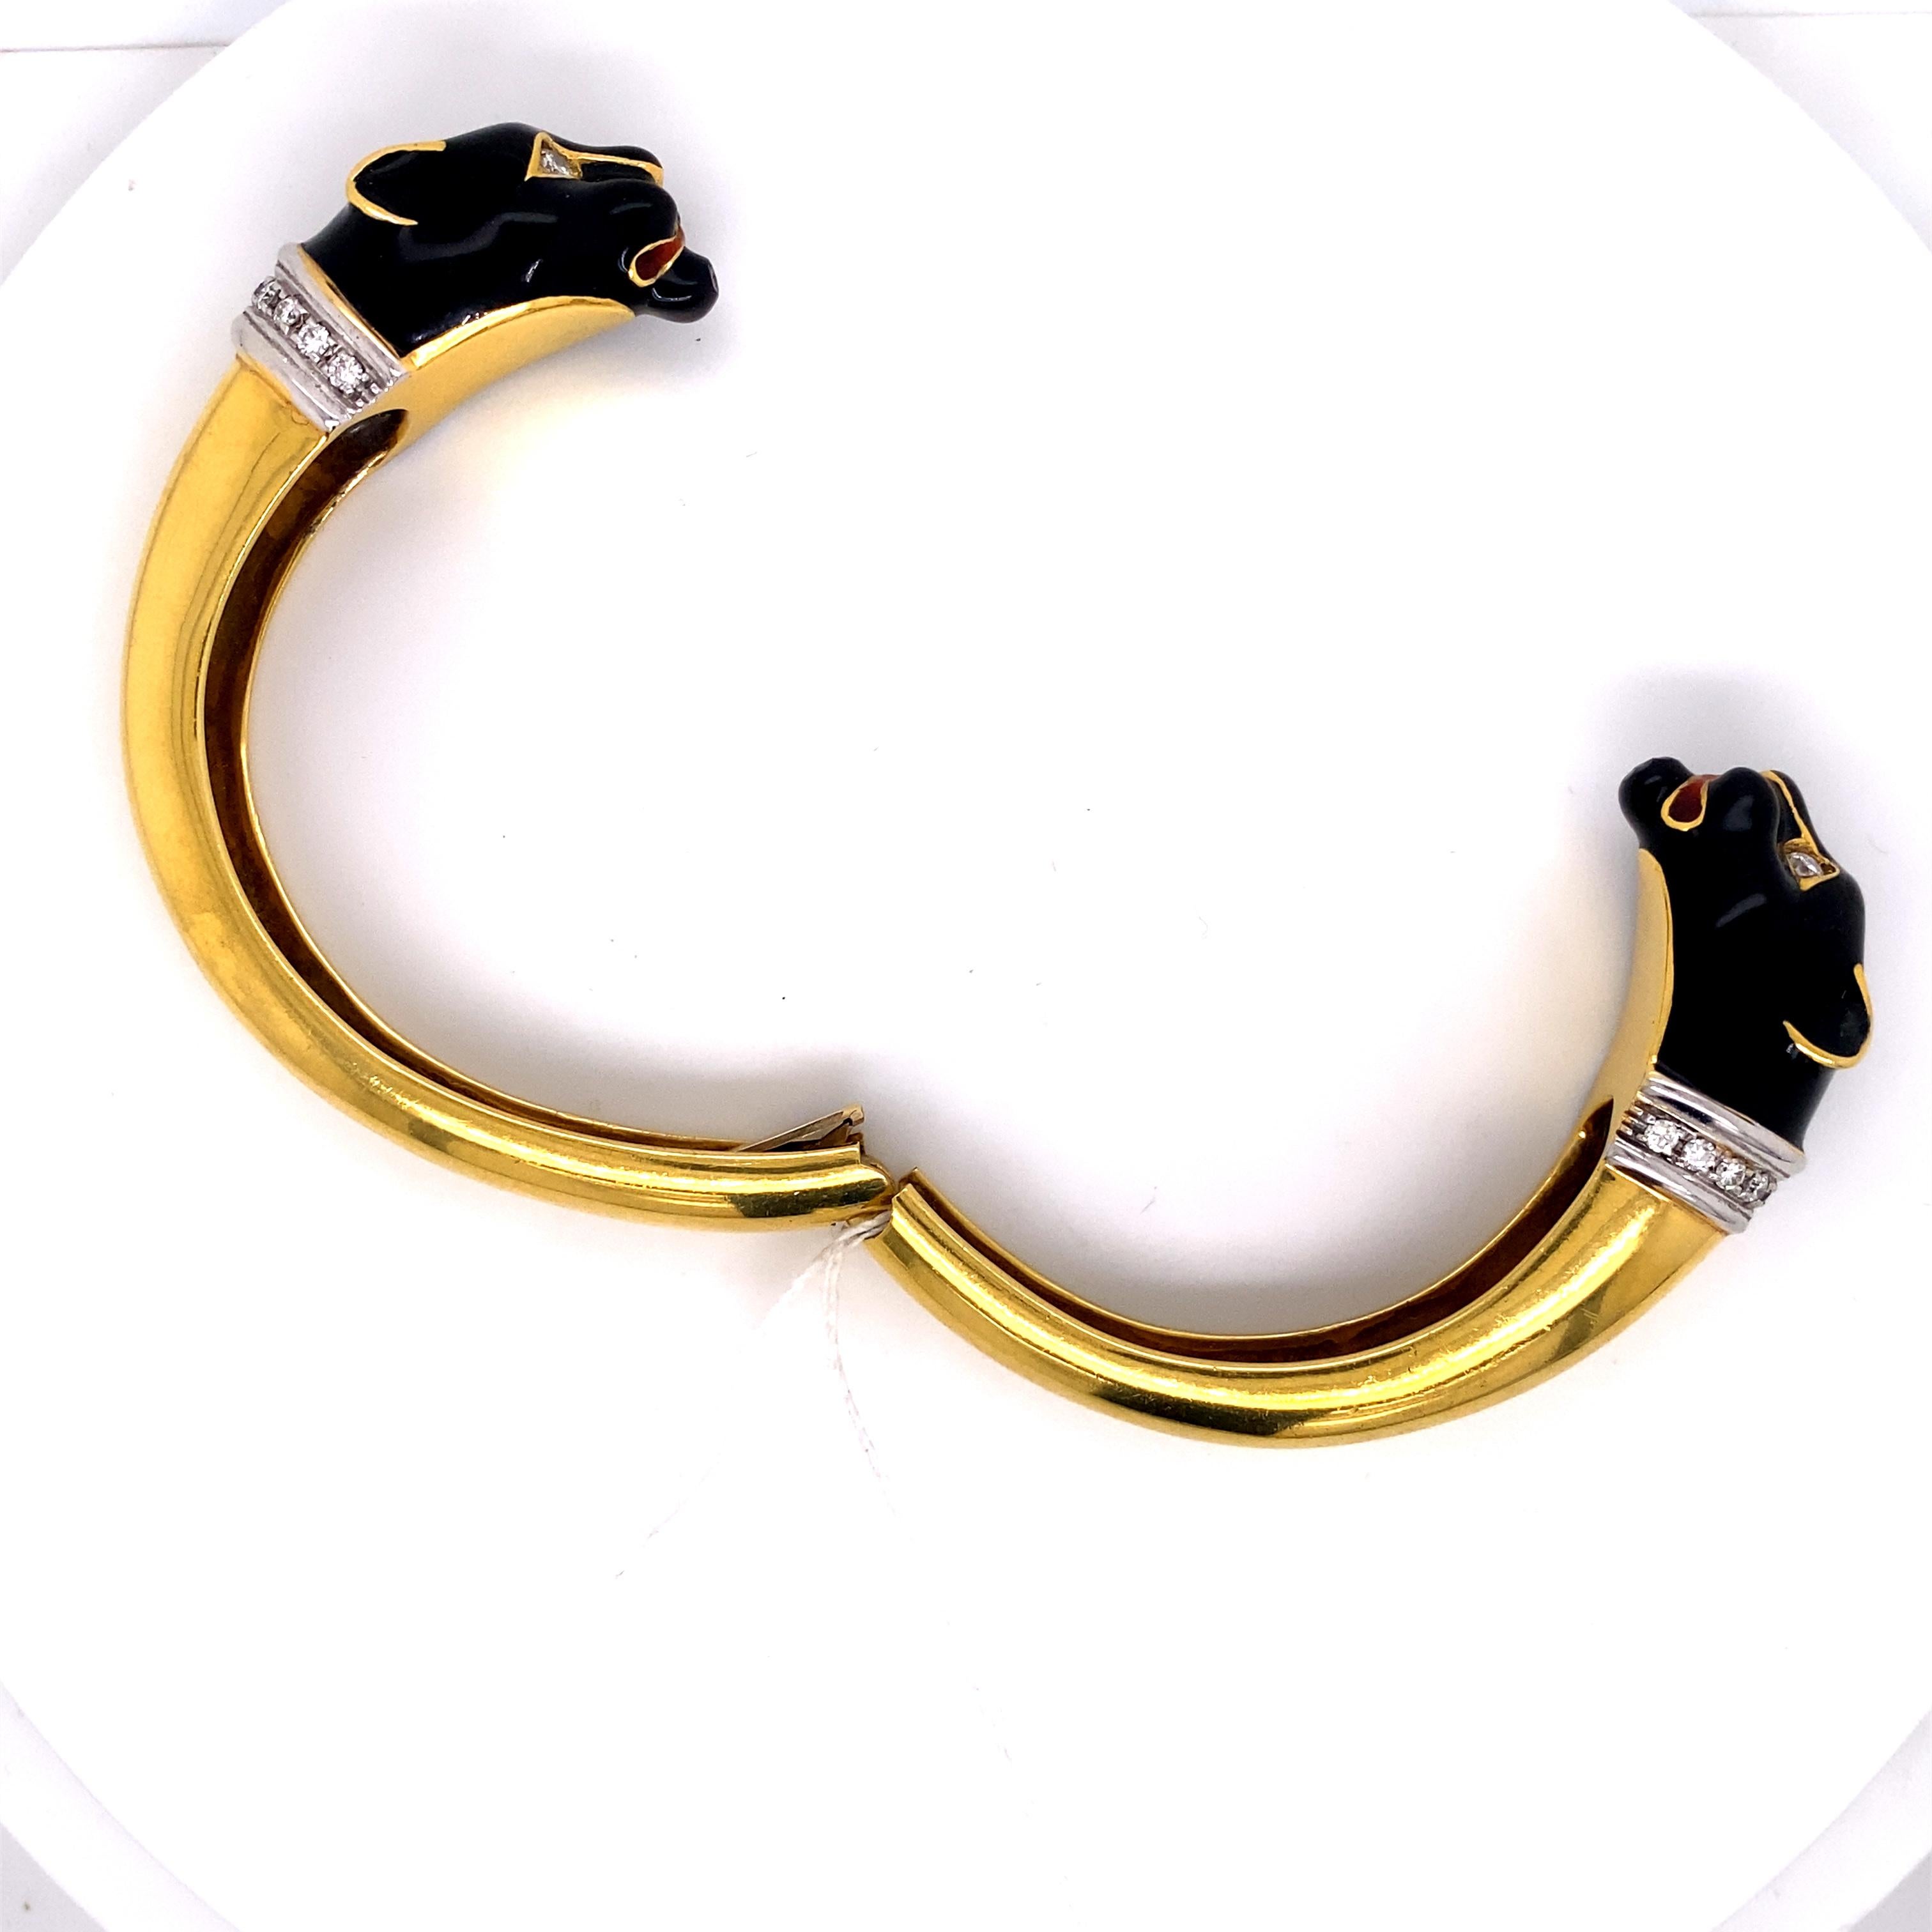 Gold Panther Cuff Bracelet with Black Enamel and Diamonds

Exquisite 18K Yellow Gold Panther Cuff Bracelet was handcrafted in circa 1970's. The detailing  of the black enameled panthers and accents of pave diamonds create a stunning look. The 18